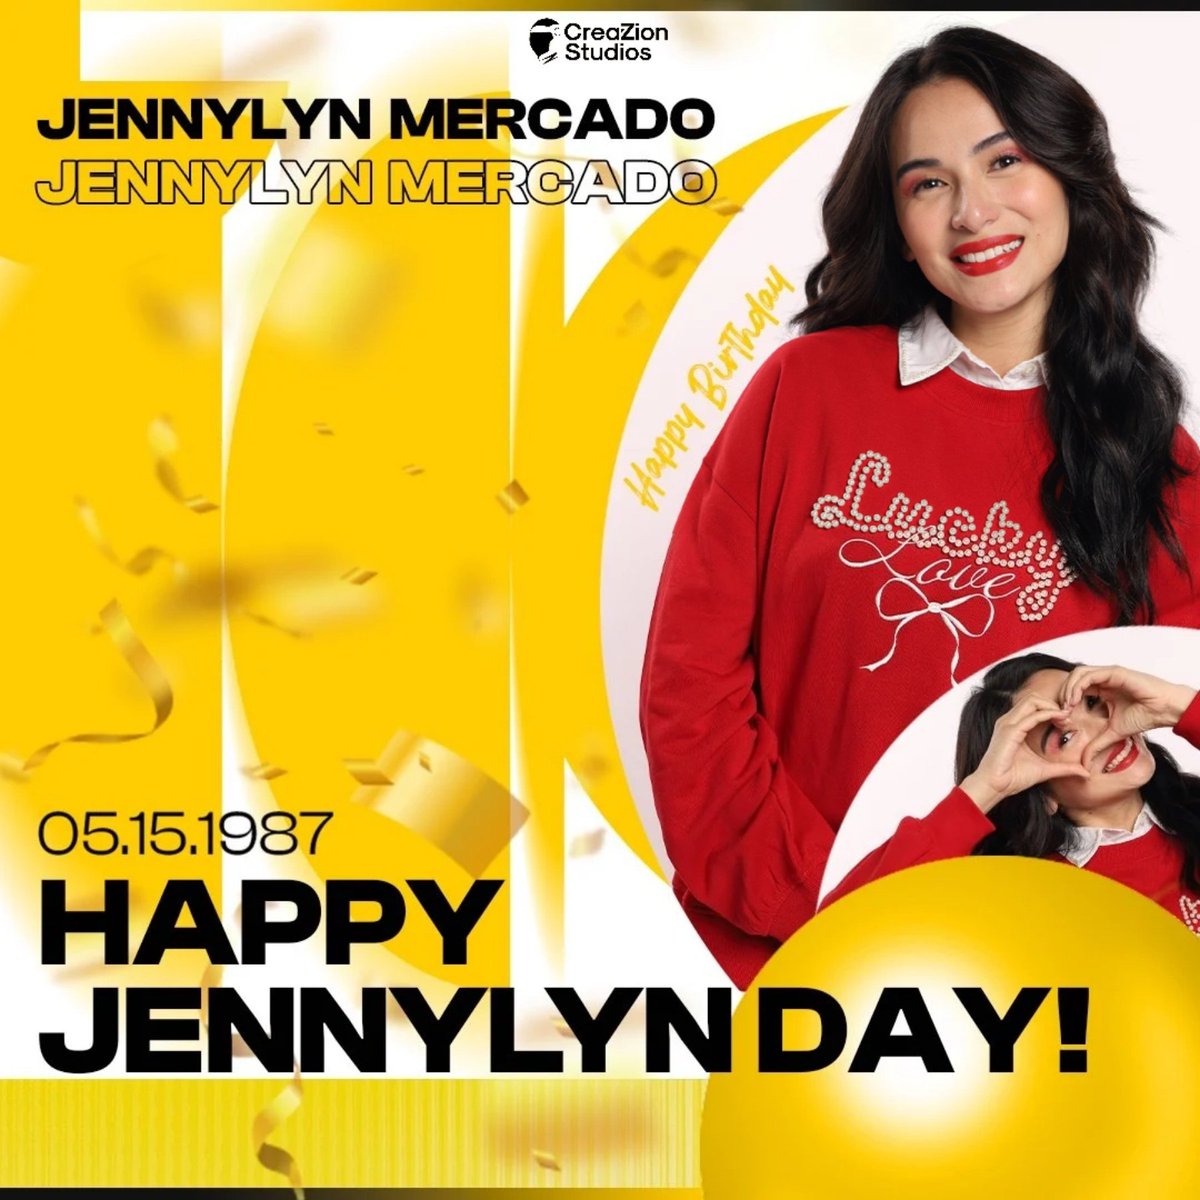 Happy Birthday to multimedia and box office icon, Jennylyn Mercado!! 🎁💗 CreaZion Studios wishes you a special day full of blessings and love. @MercadoJen #JennylynMercado